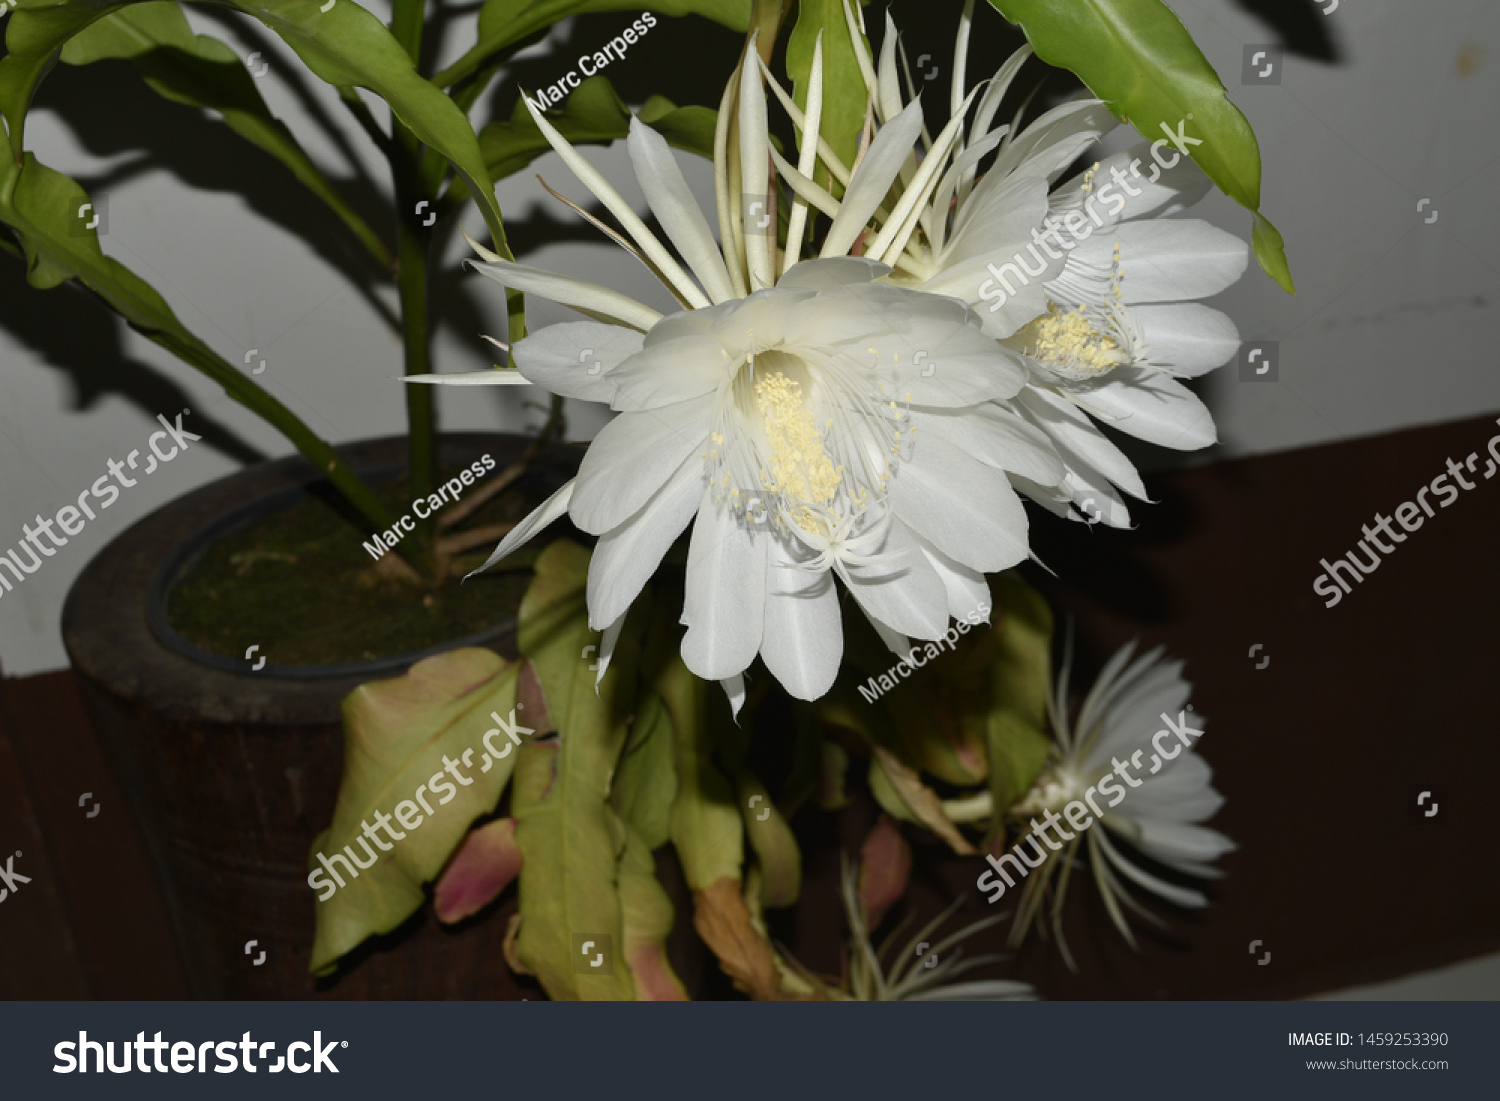 Crenate Orchid Cactus Flower That Blooms Nature Stock Image 1459253390,How Long Should My Curtains Be For 10 Foot Ceilings